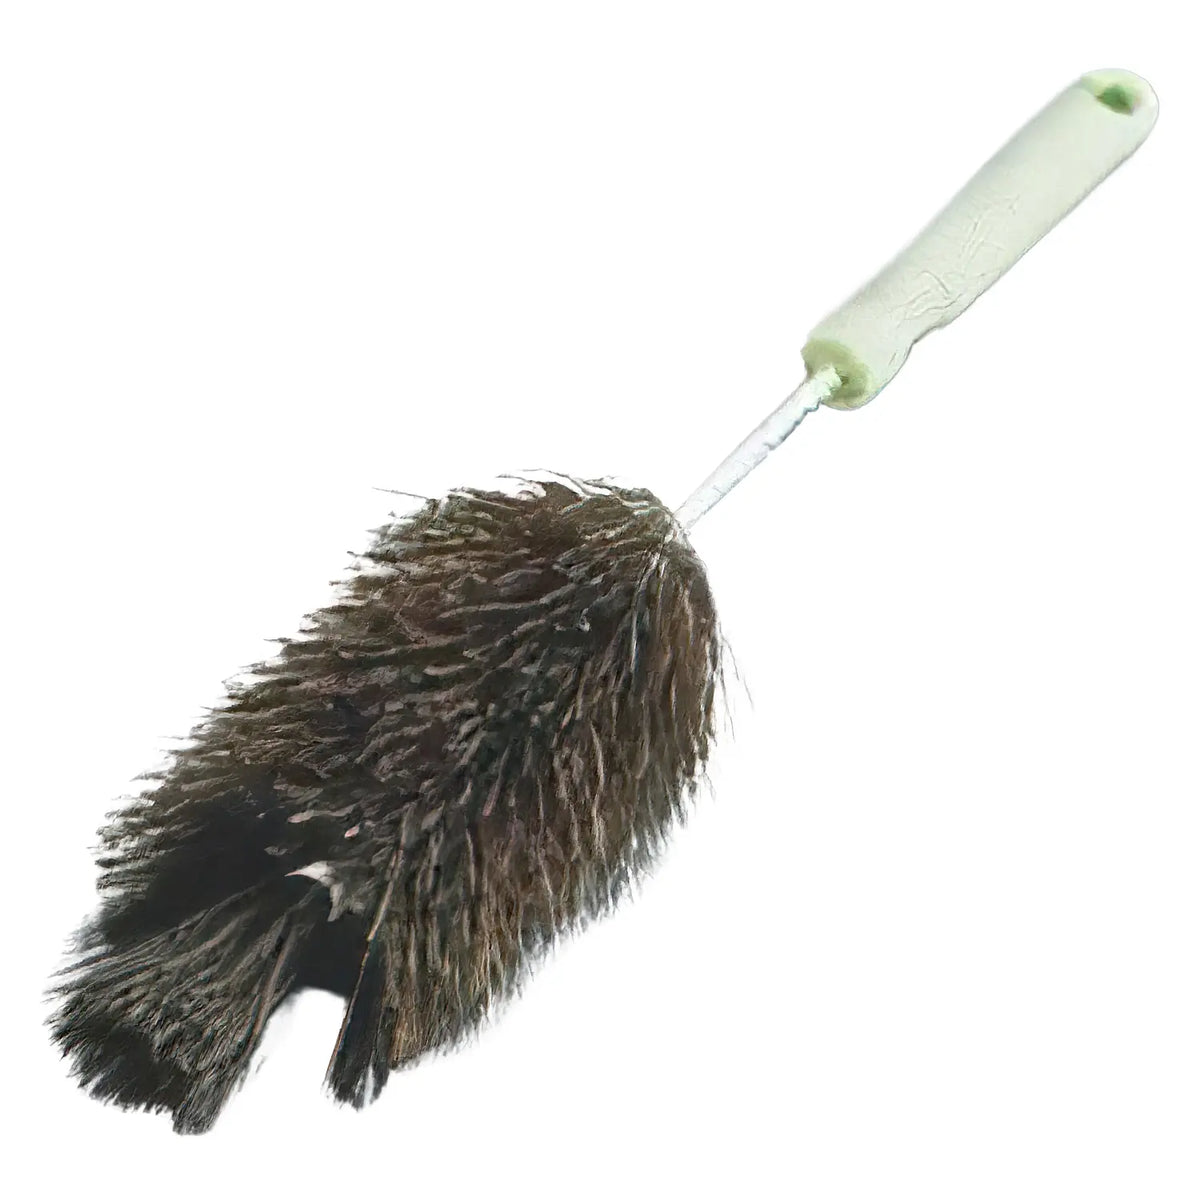 Horse Hair Plate Cleaning Brush with Handle (tooth brush style) - Free